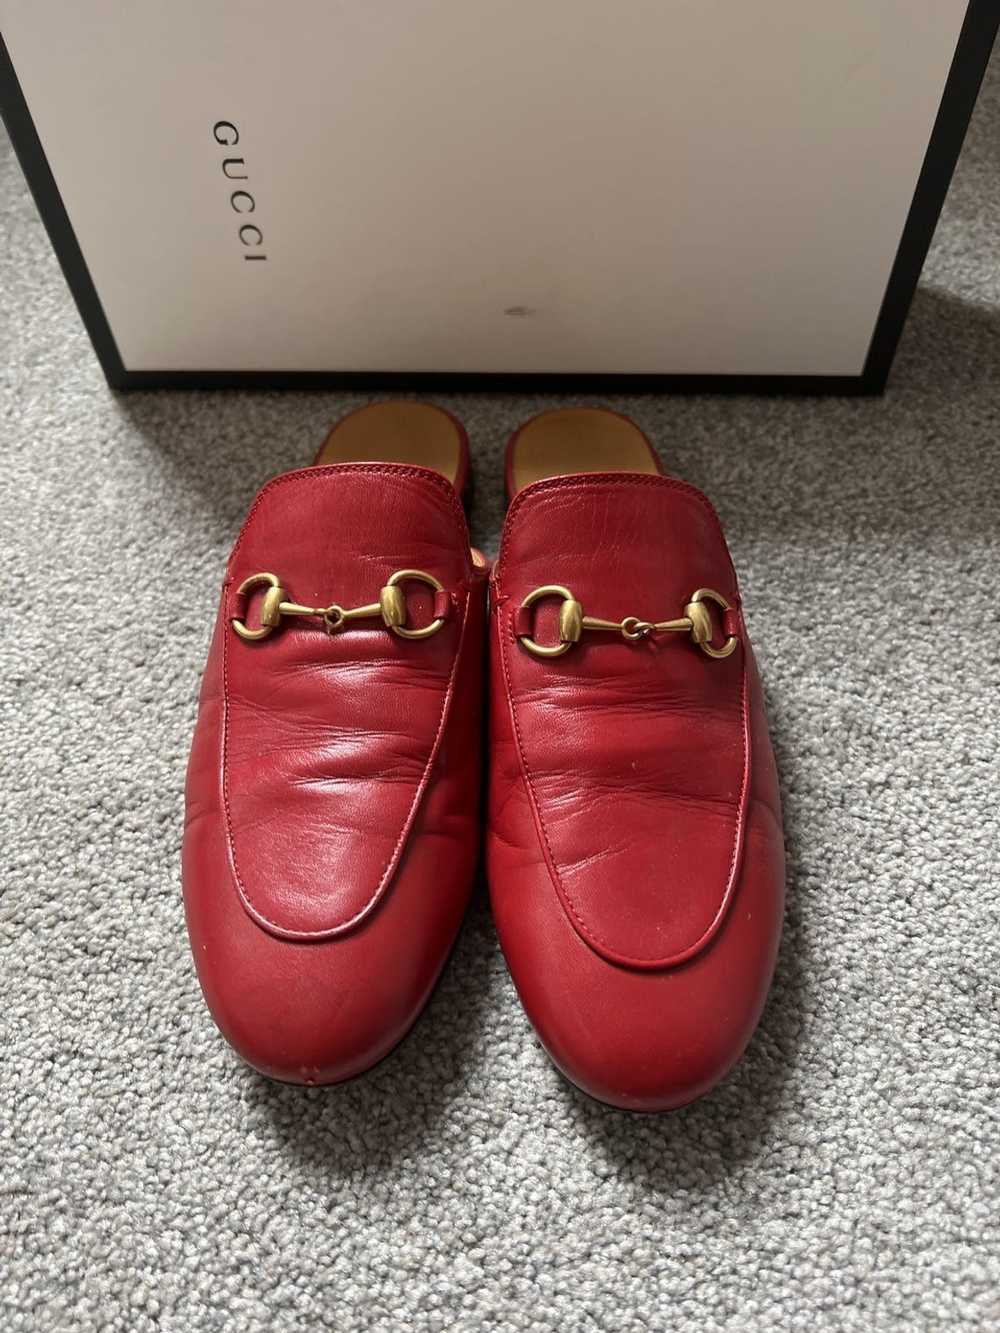 Gucci Gucci princetown leather mule - image 2